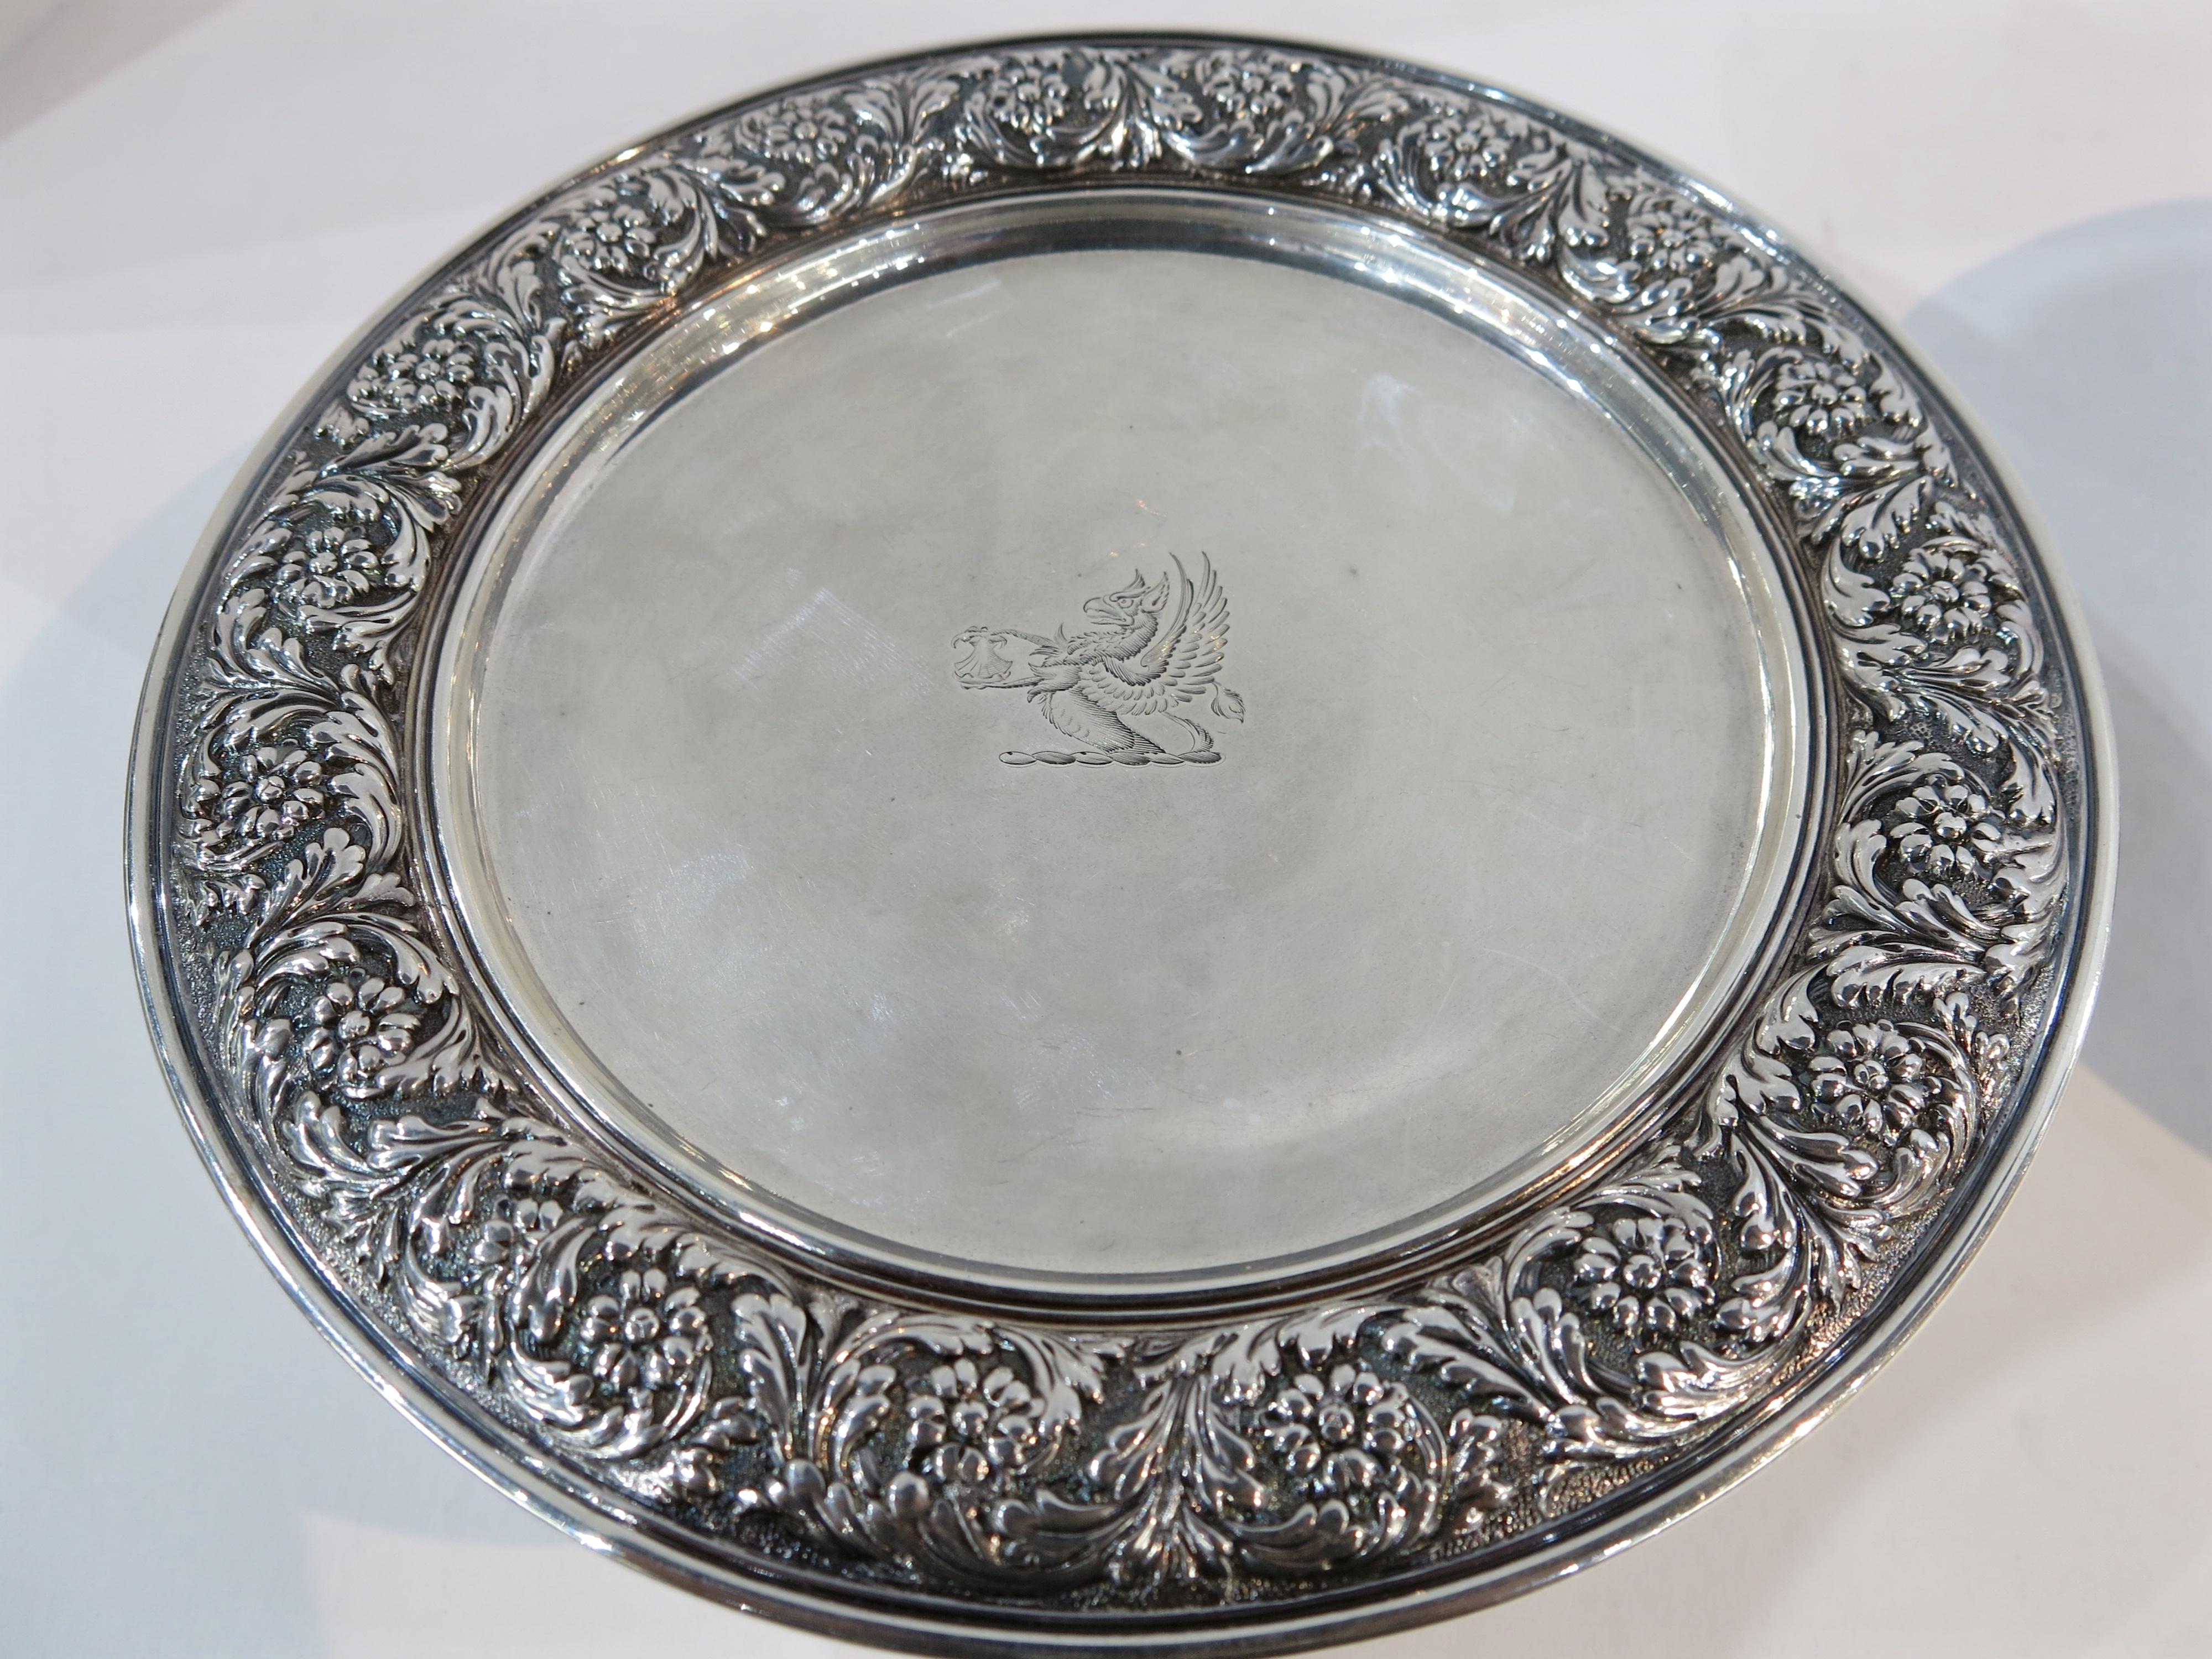 Tiffany Sterling Silver Antique Pair of Taza / Pedestal Dishes For Sale 1